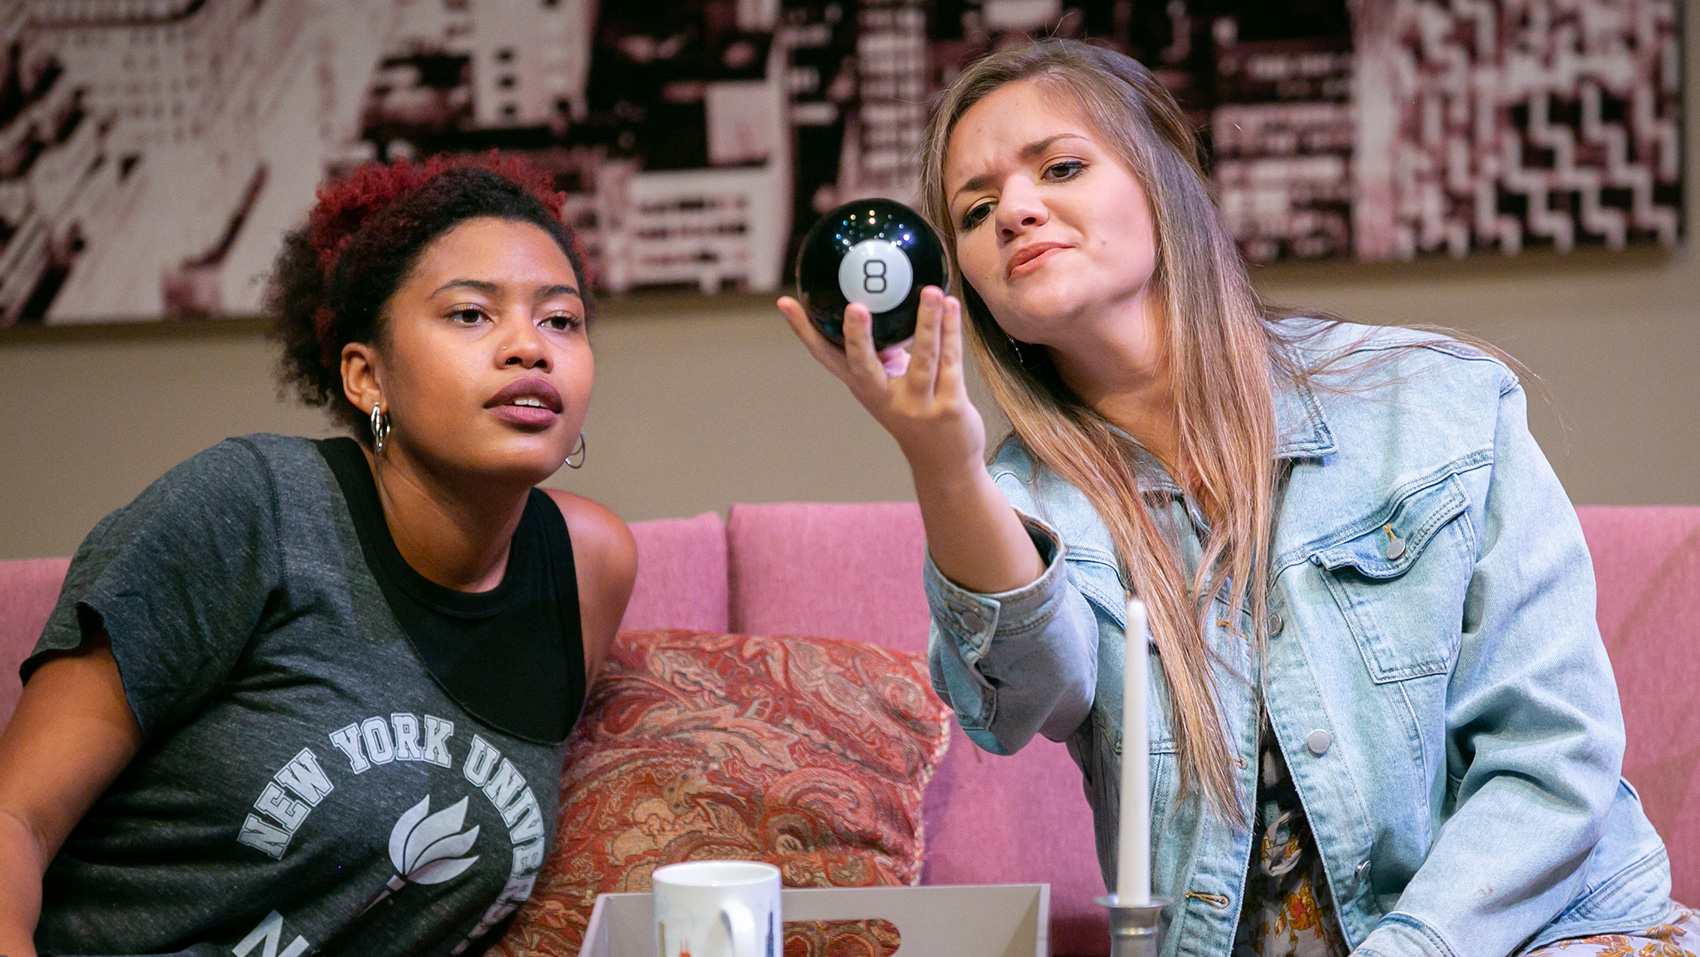 The two main women characters sit on a couch observing a magic eight ball.